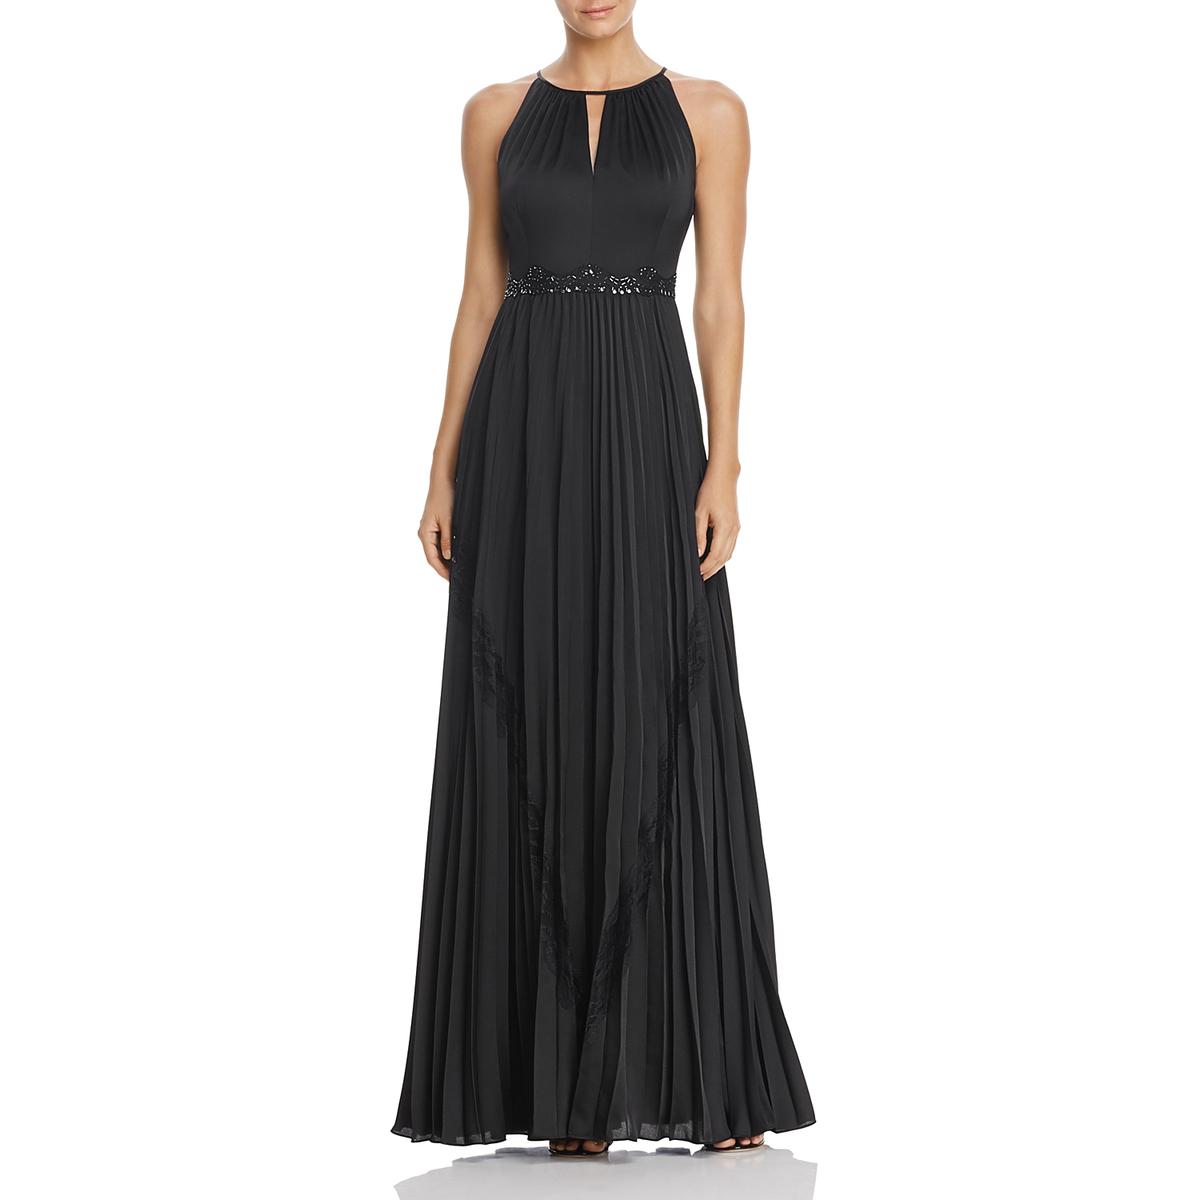 Adrianna Papell Womens Beaded Pleated High-Neck Formal Dress Gown BHFO ...